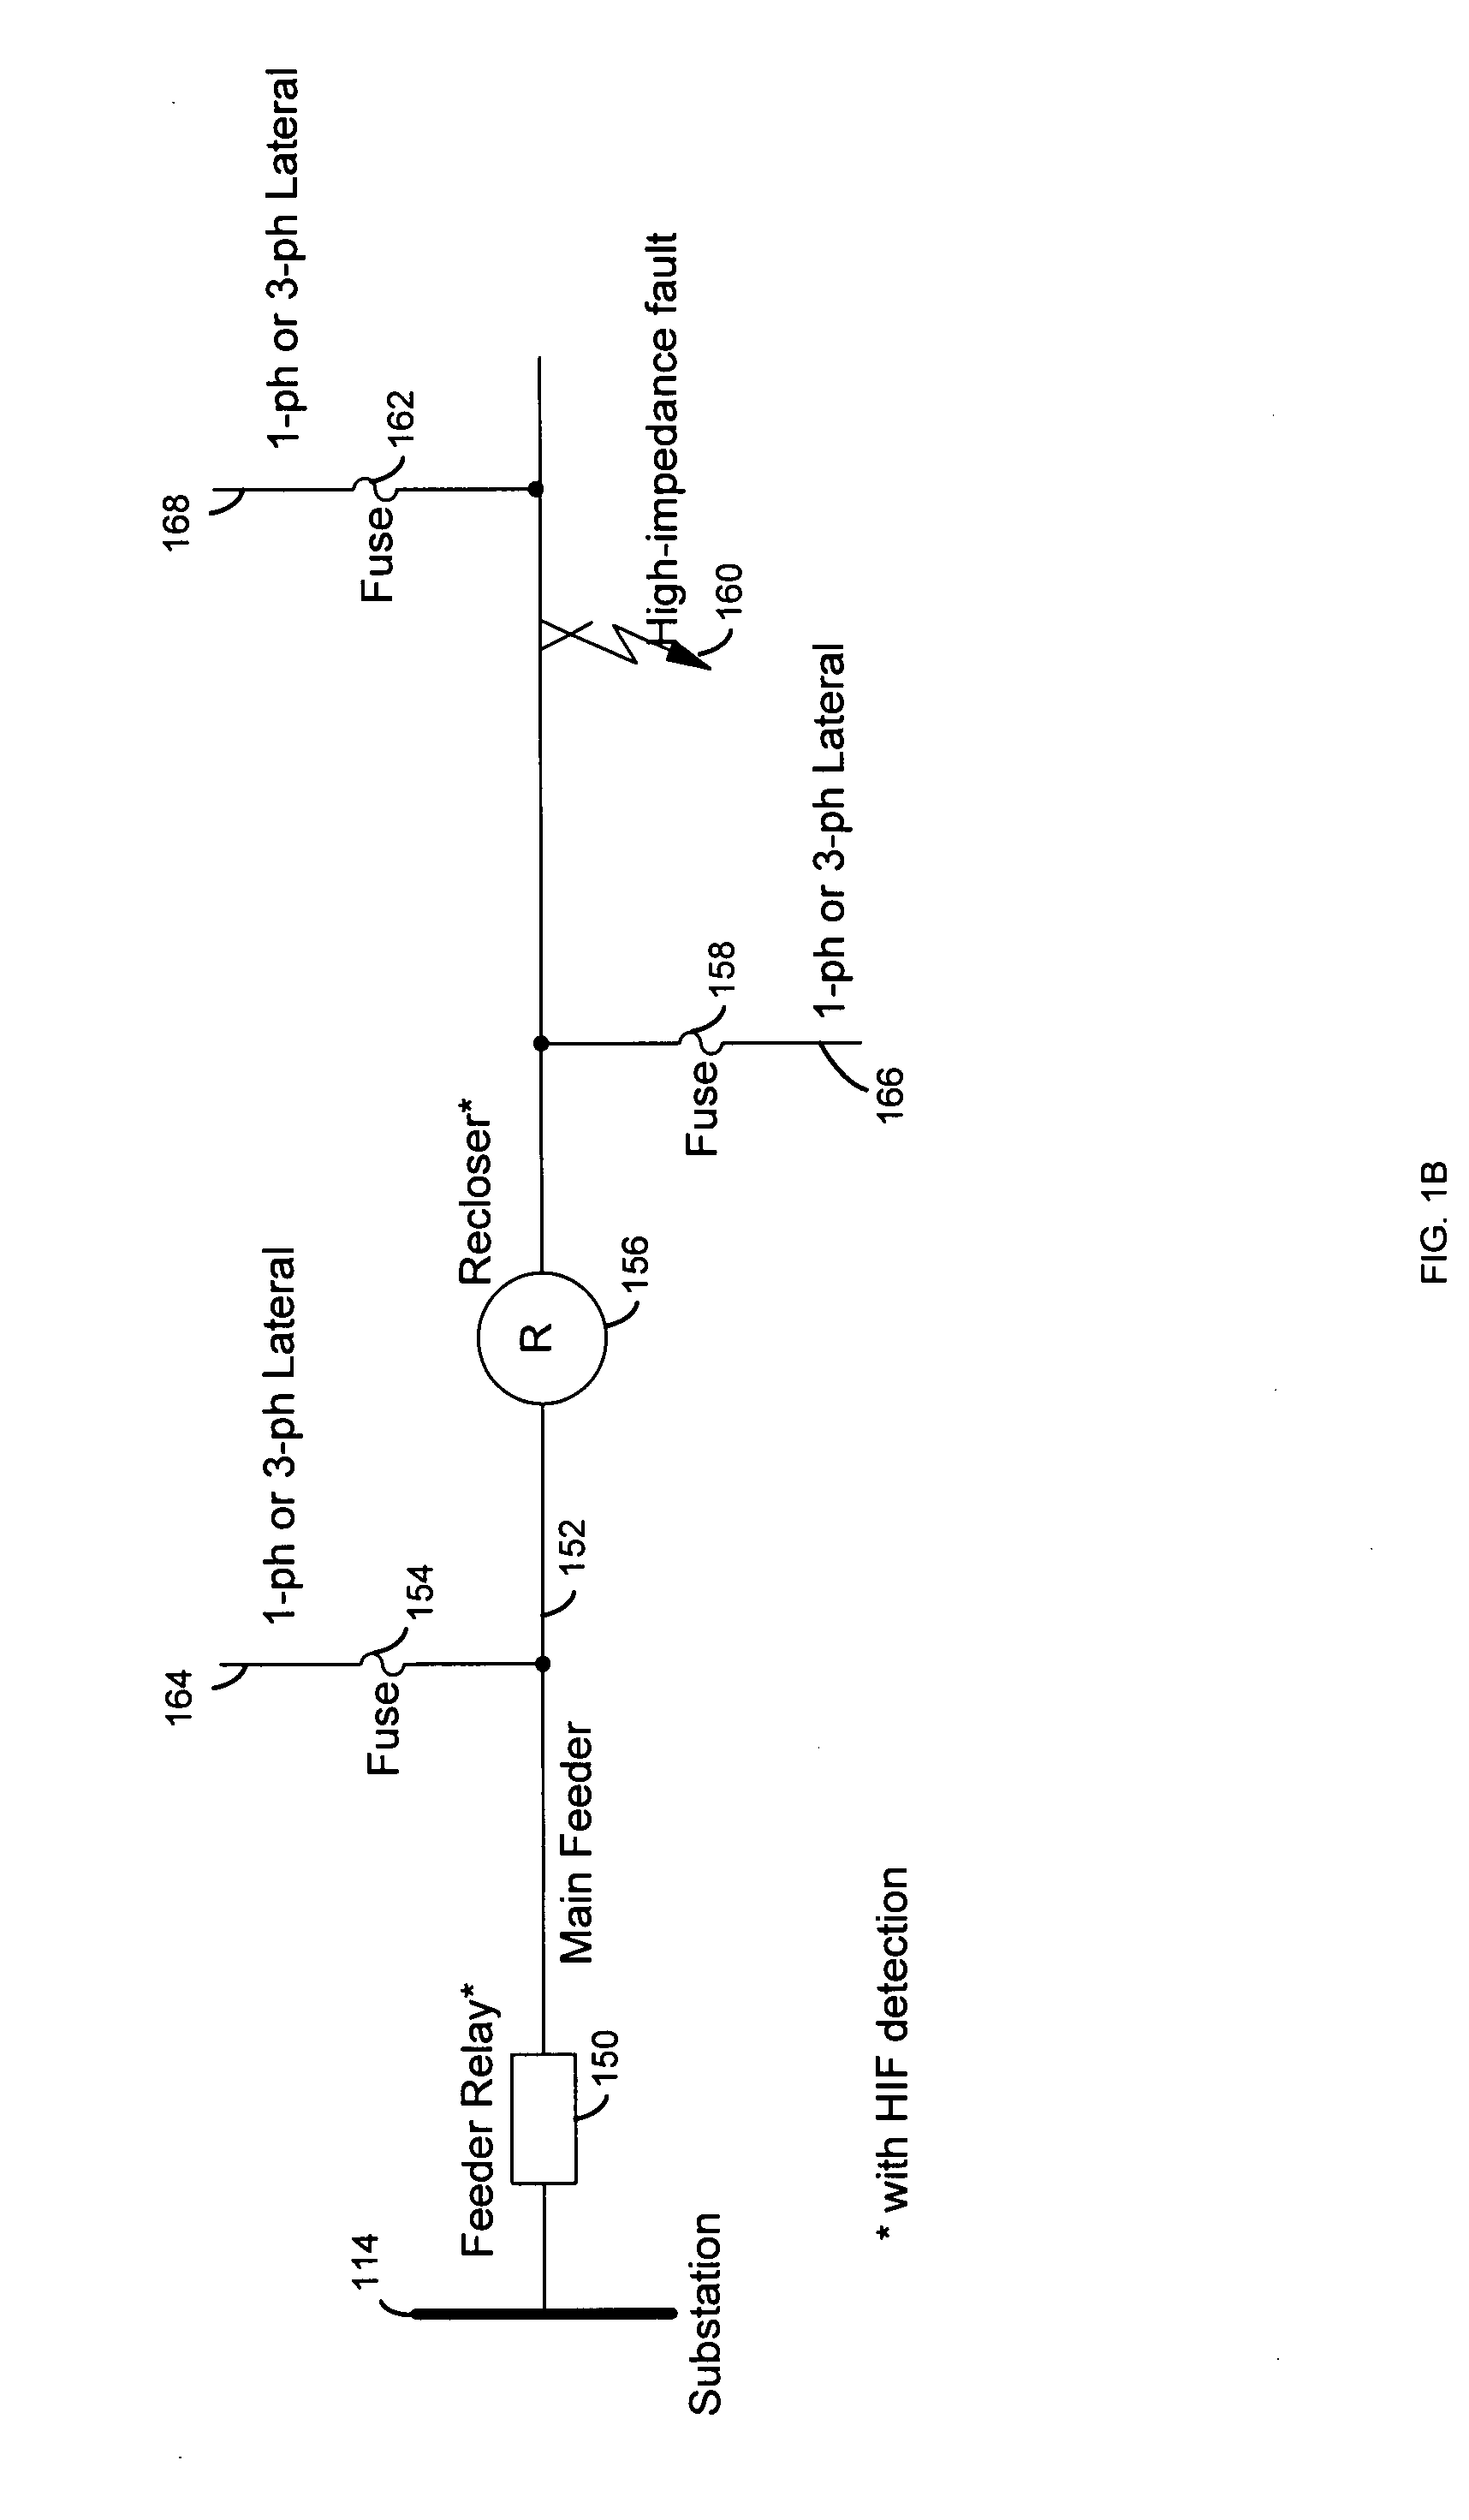 Systems and methods for detecting high-impedance faults in a multi-grounded power distribution system